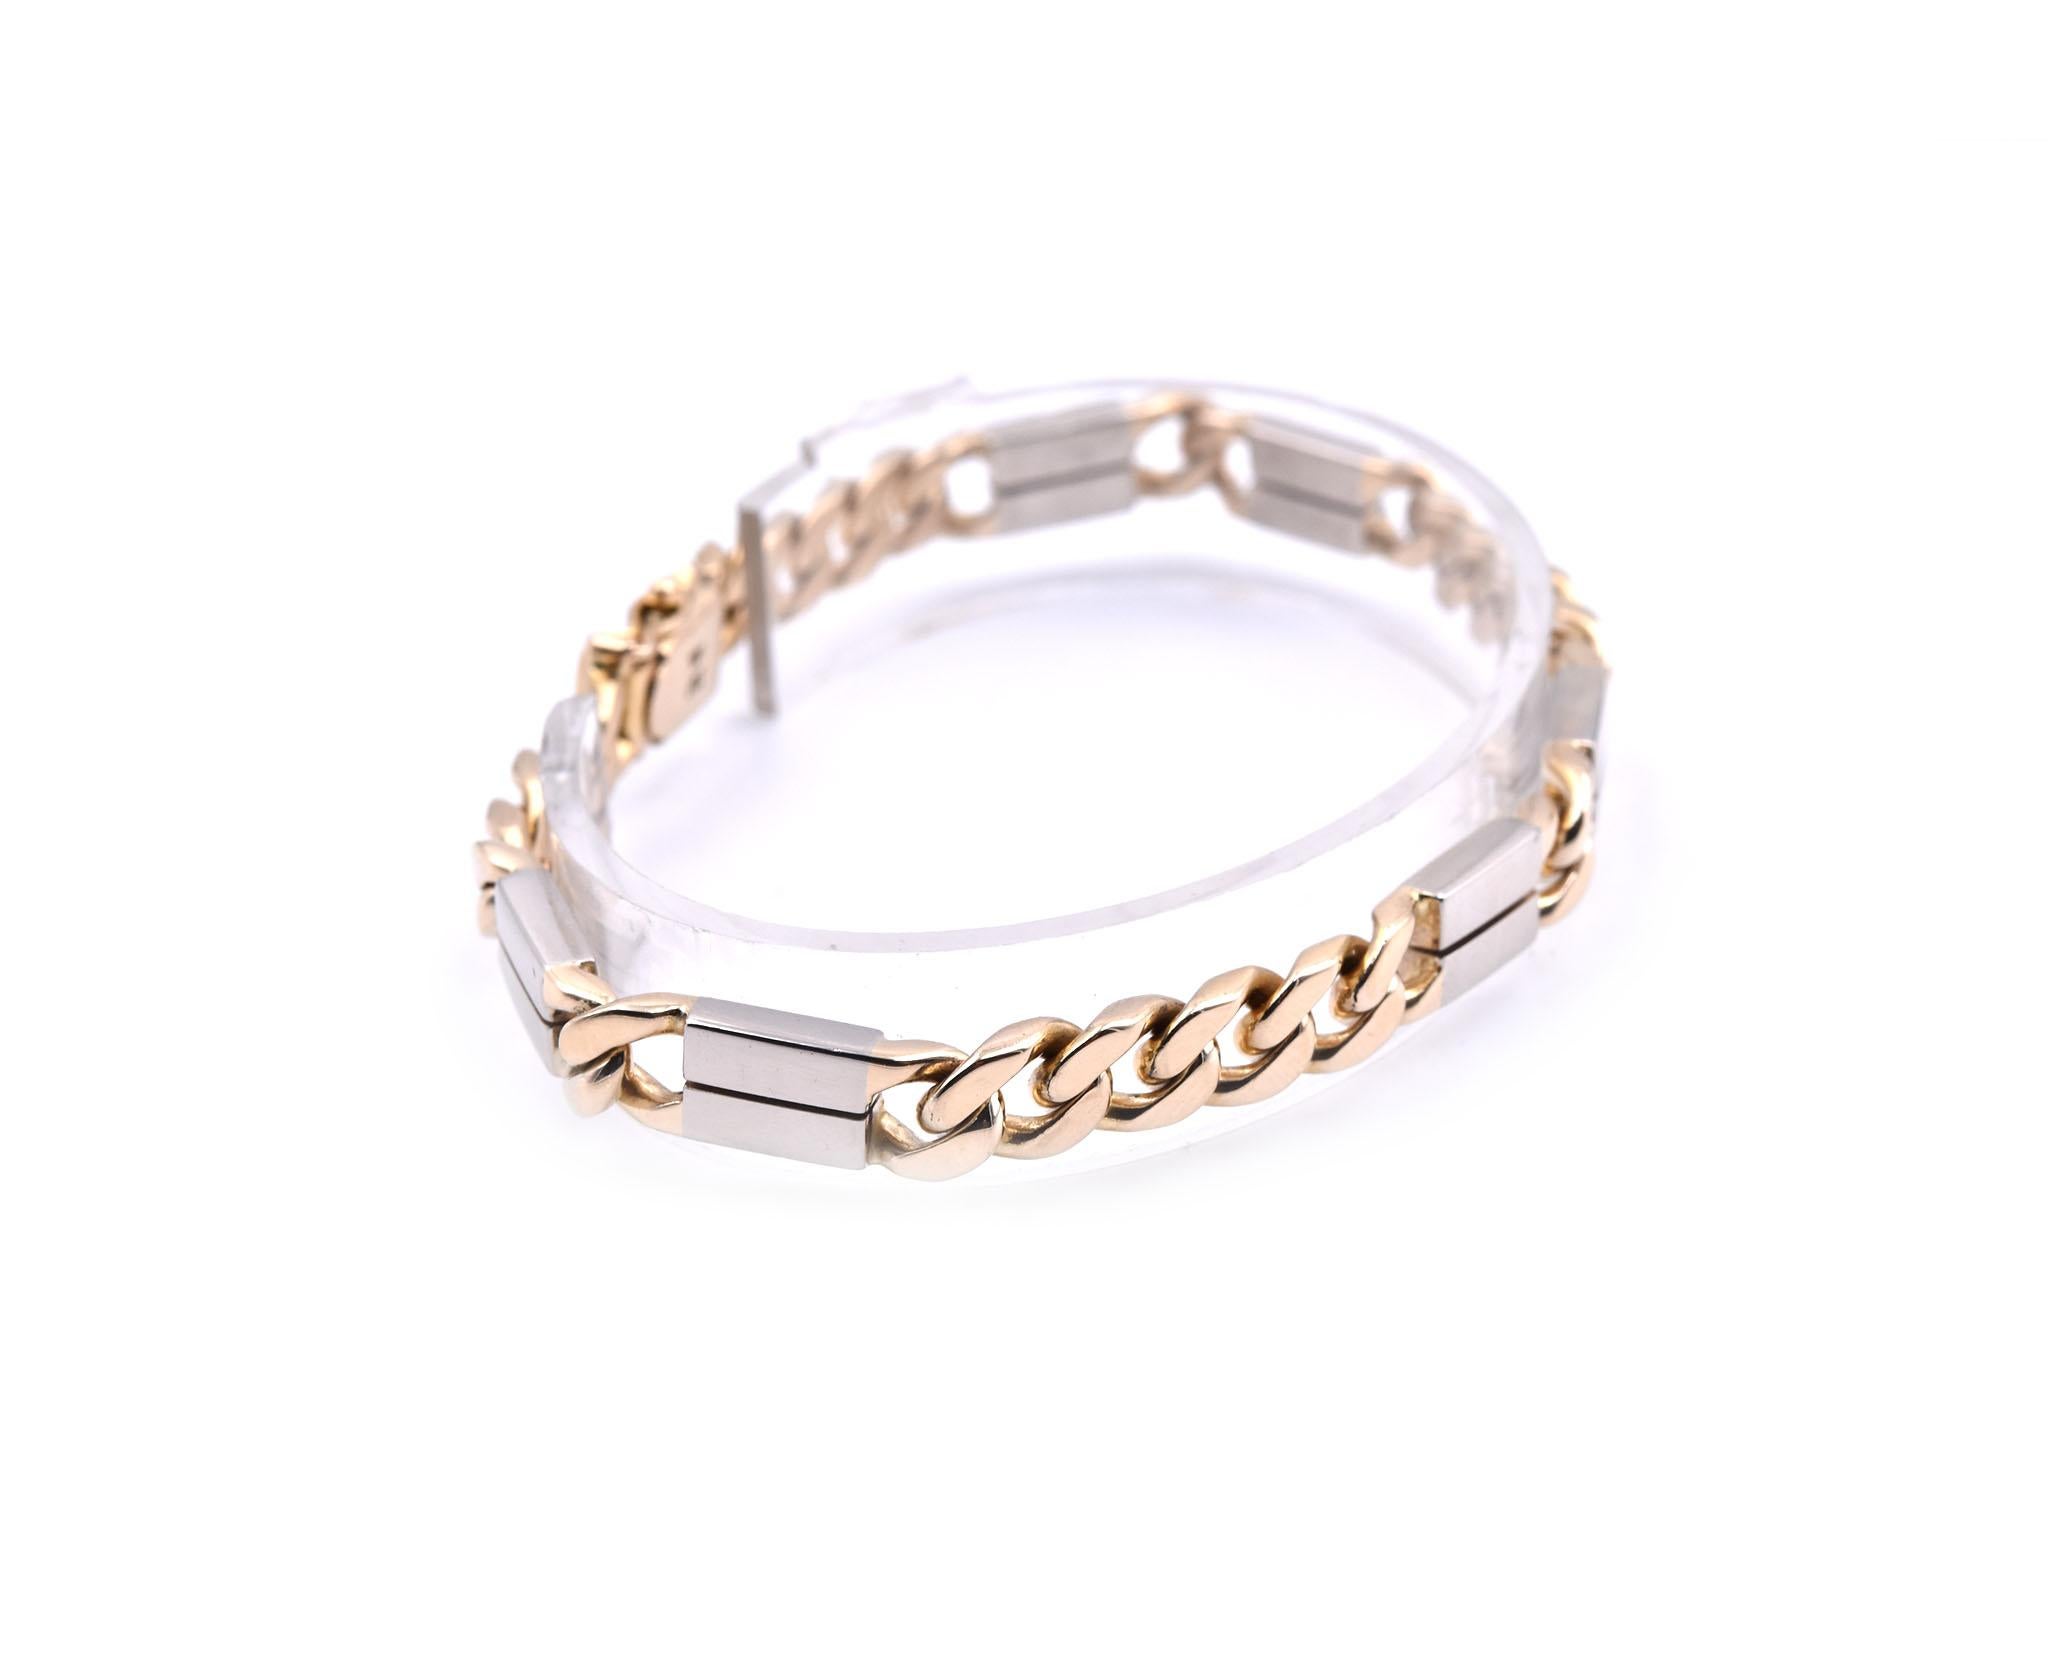 Designer: custom design 
Material: 14k yellow and white gold
Dimensions: bracelet will fit an 8-inch wrist, bracelet is 6.52mm wide
Weight: 33.60 grams
